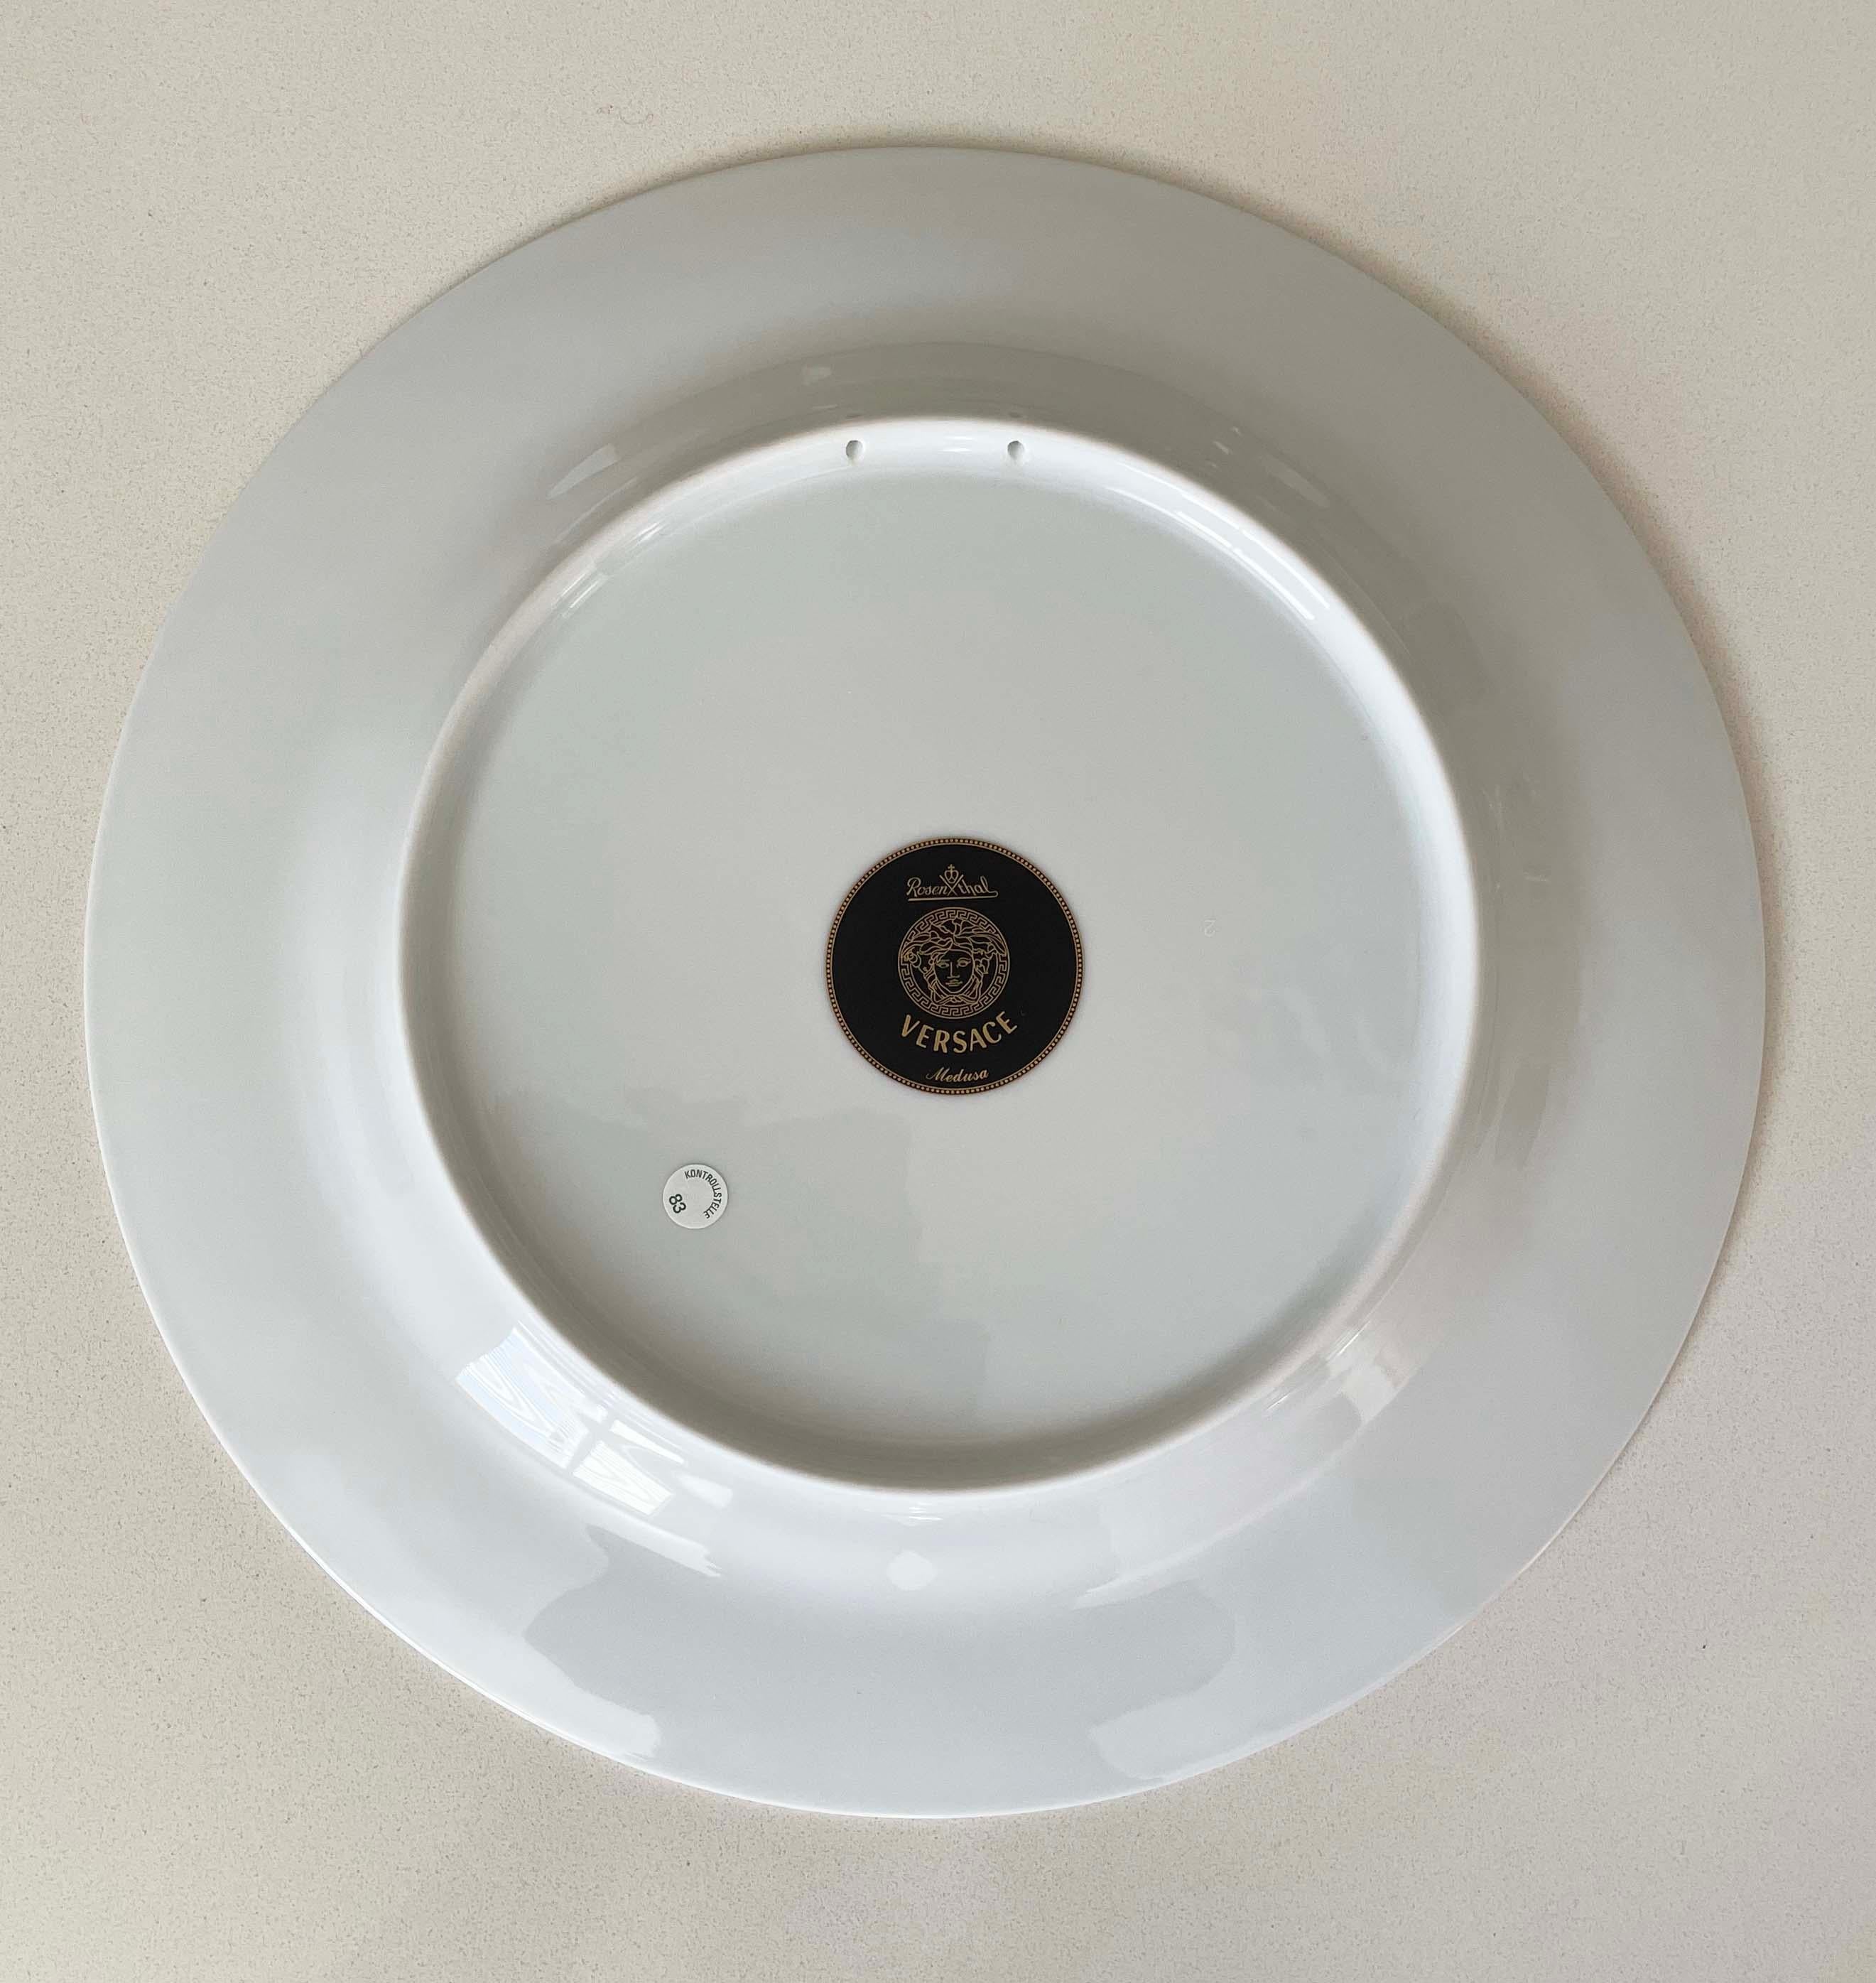  Versace Porcelain Medusa Display Plate By Rosenthal, 20th Century In Excellent Condition For Sale In Melbourne, Victoria